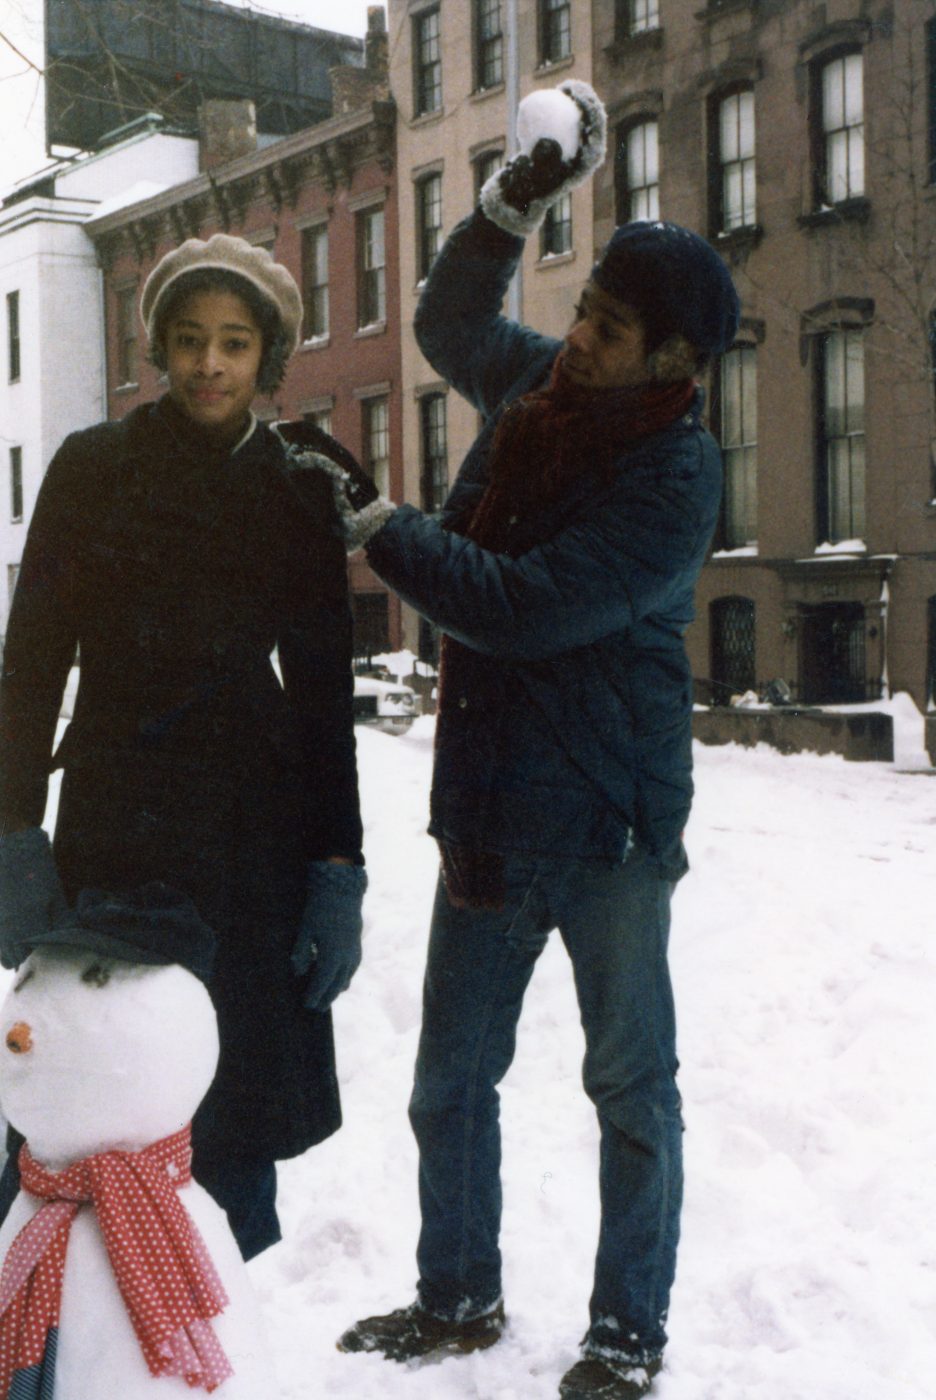 Lisane and Jean-Michel in a snowball fight, Boerum Hill, Brooklyn, ca. 1976